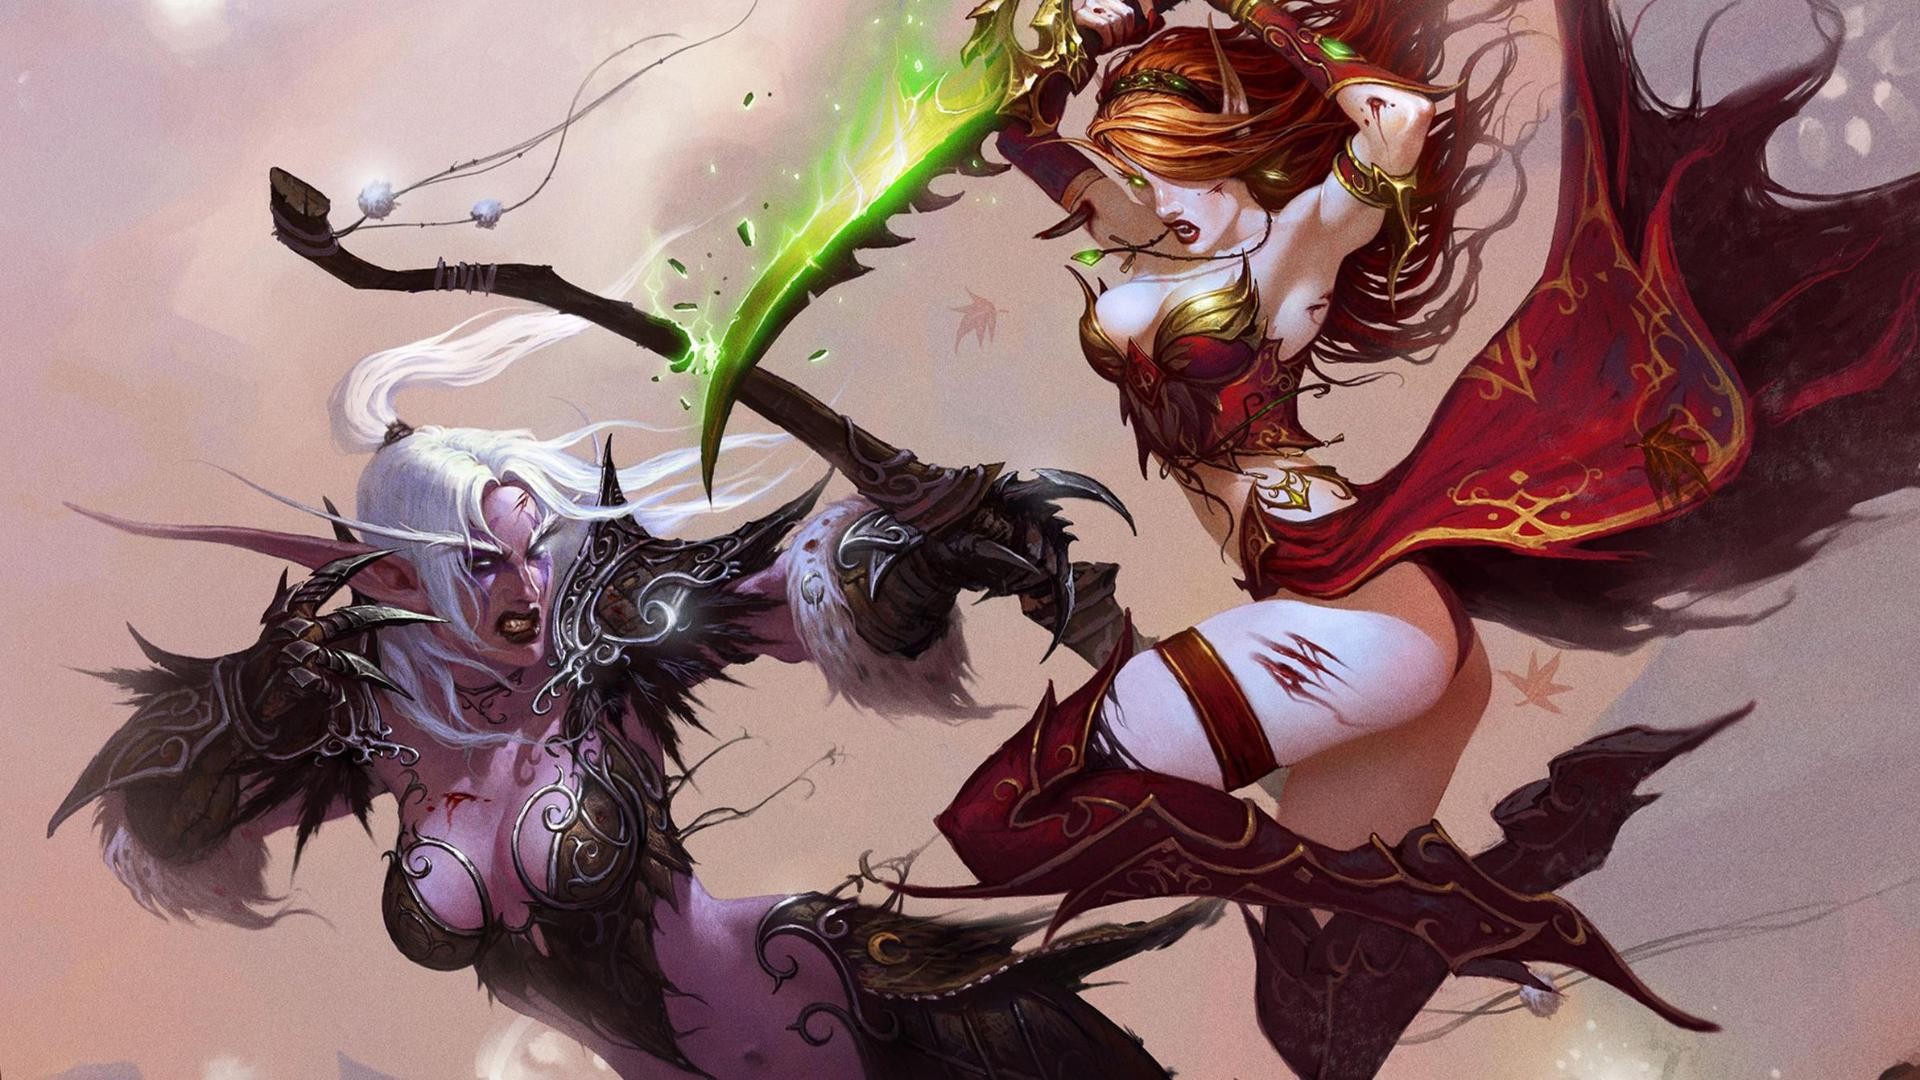 General 1920x1080 Warcraft World of Warcraft blood elves night elves video games PC gaming women with swords sword boobs ass redhead pointy ears two women fantasy art fantasy girl battle